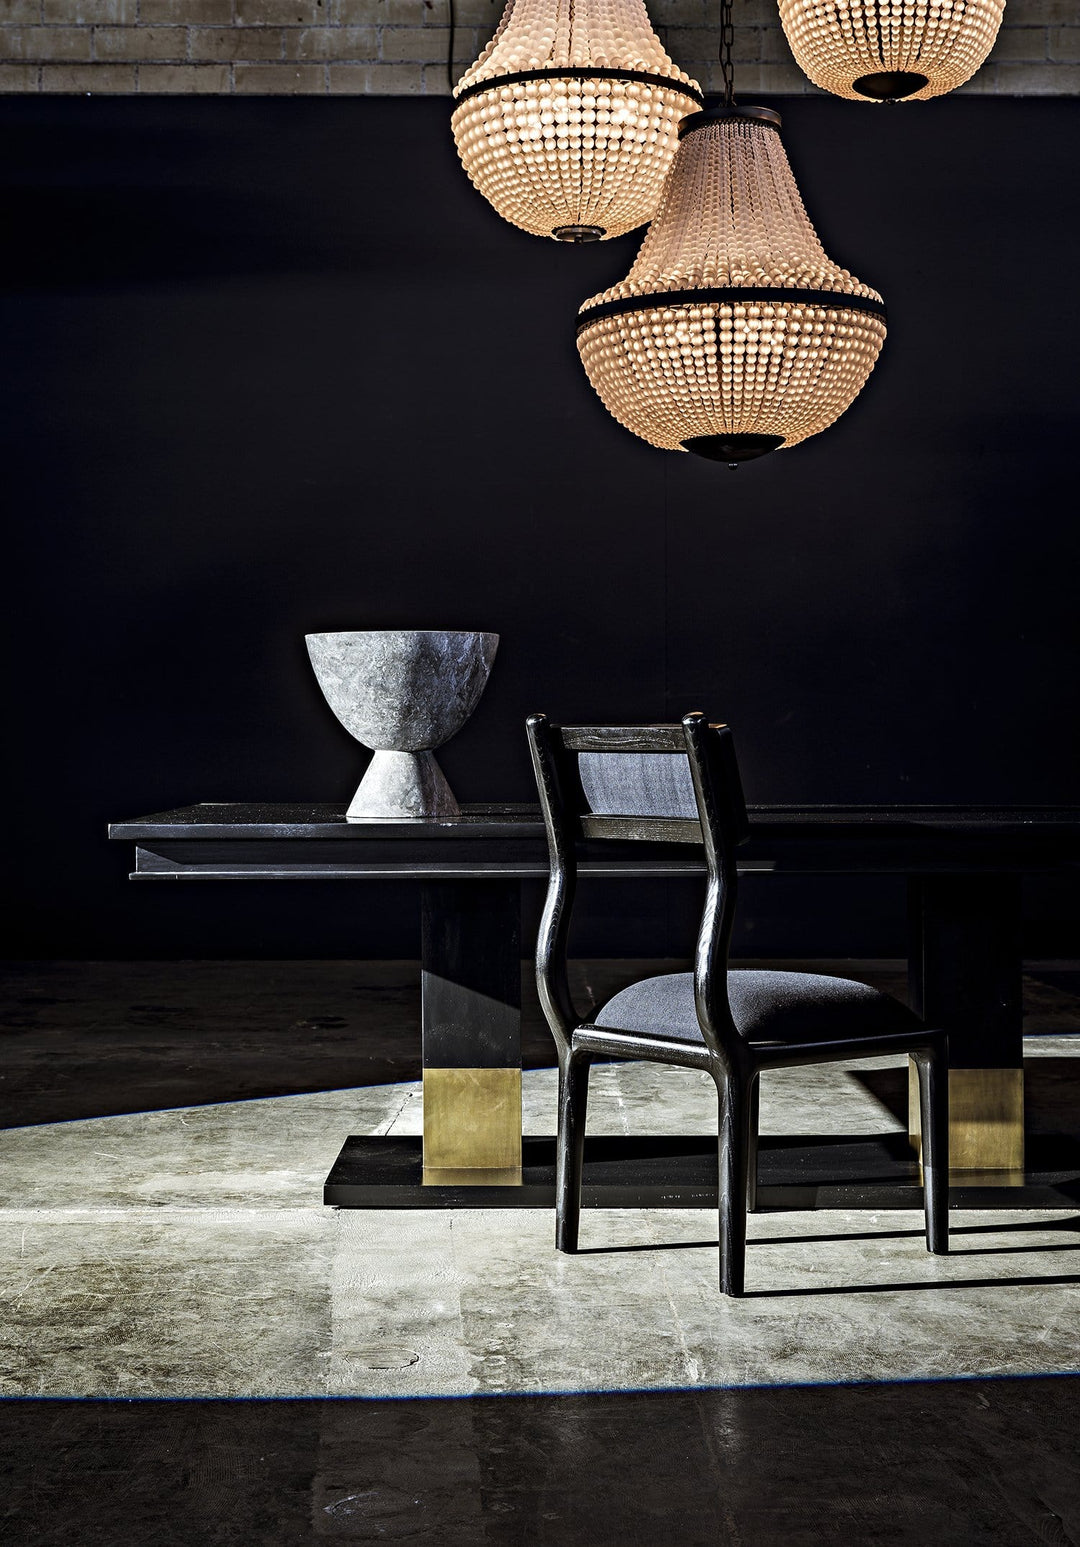 Reba Dining Table - Hand Rubbed Black With Brass Accents